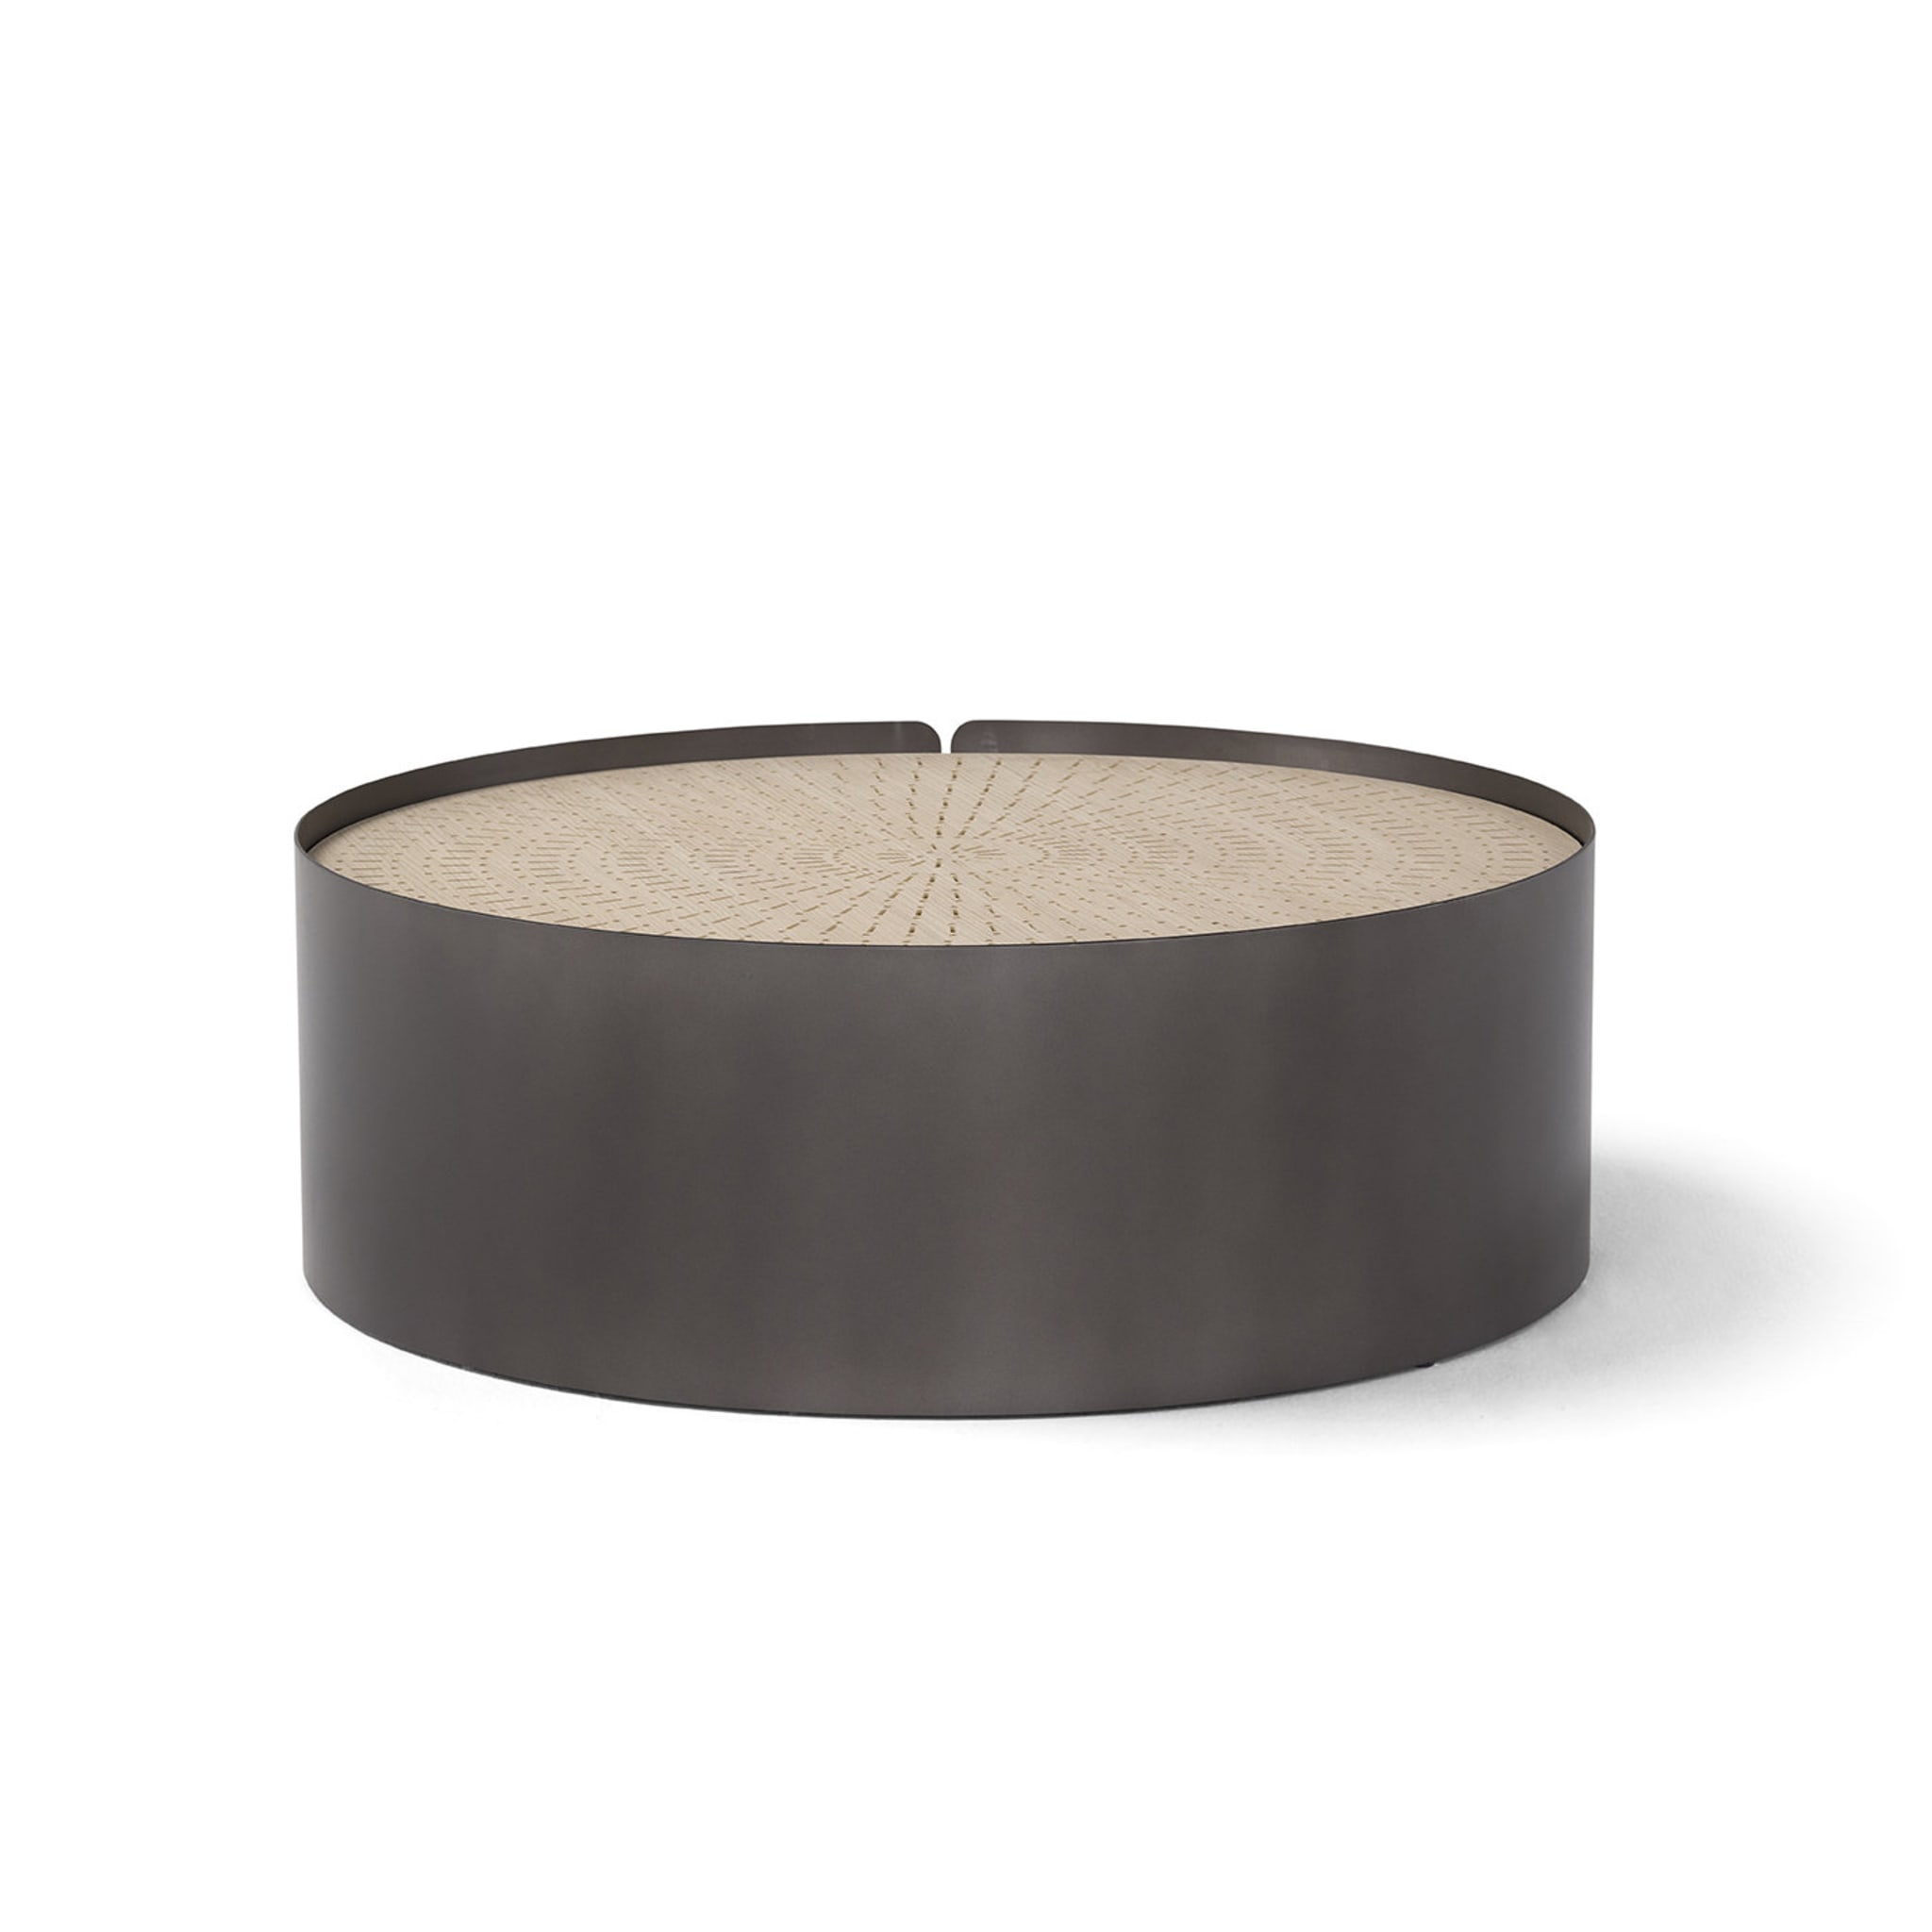 Setacci Natural Oak Coffee Table By Anton Cristell and Emanuel Gargano - Alternative view 2